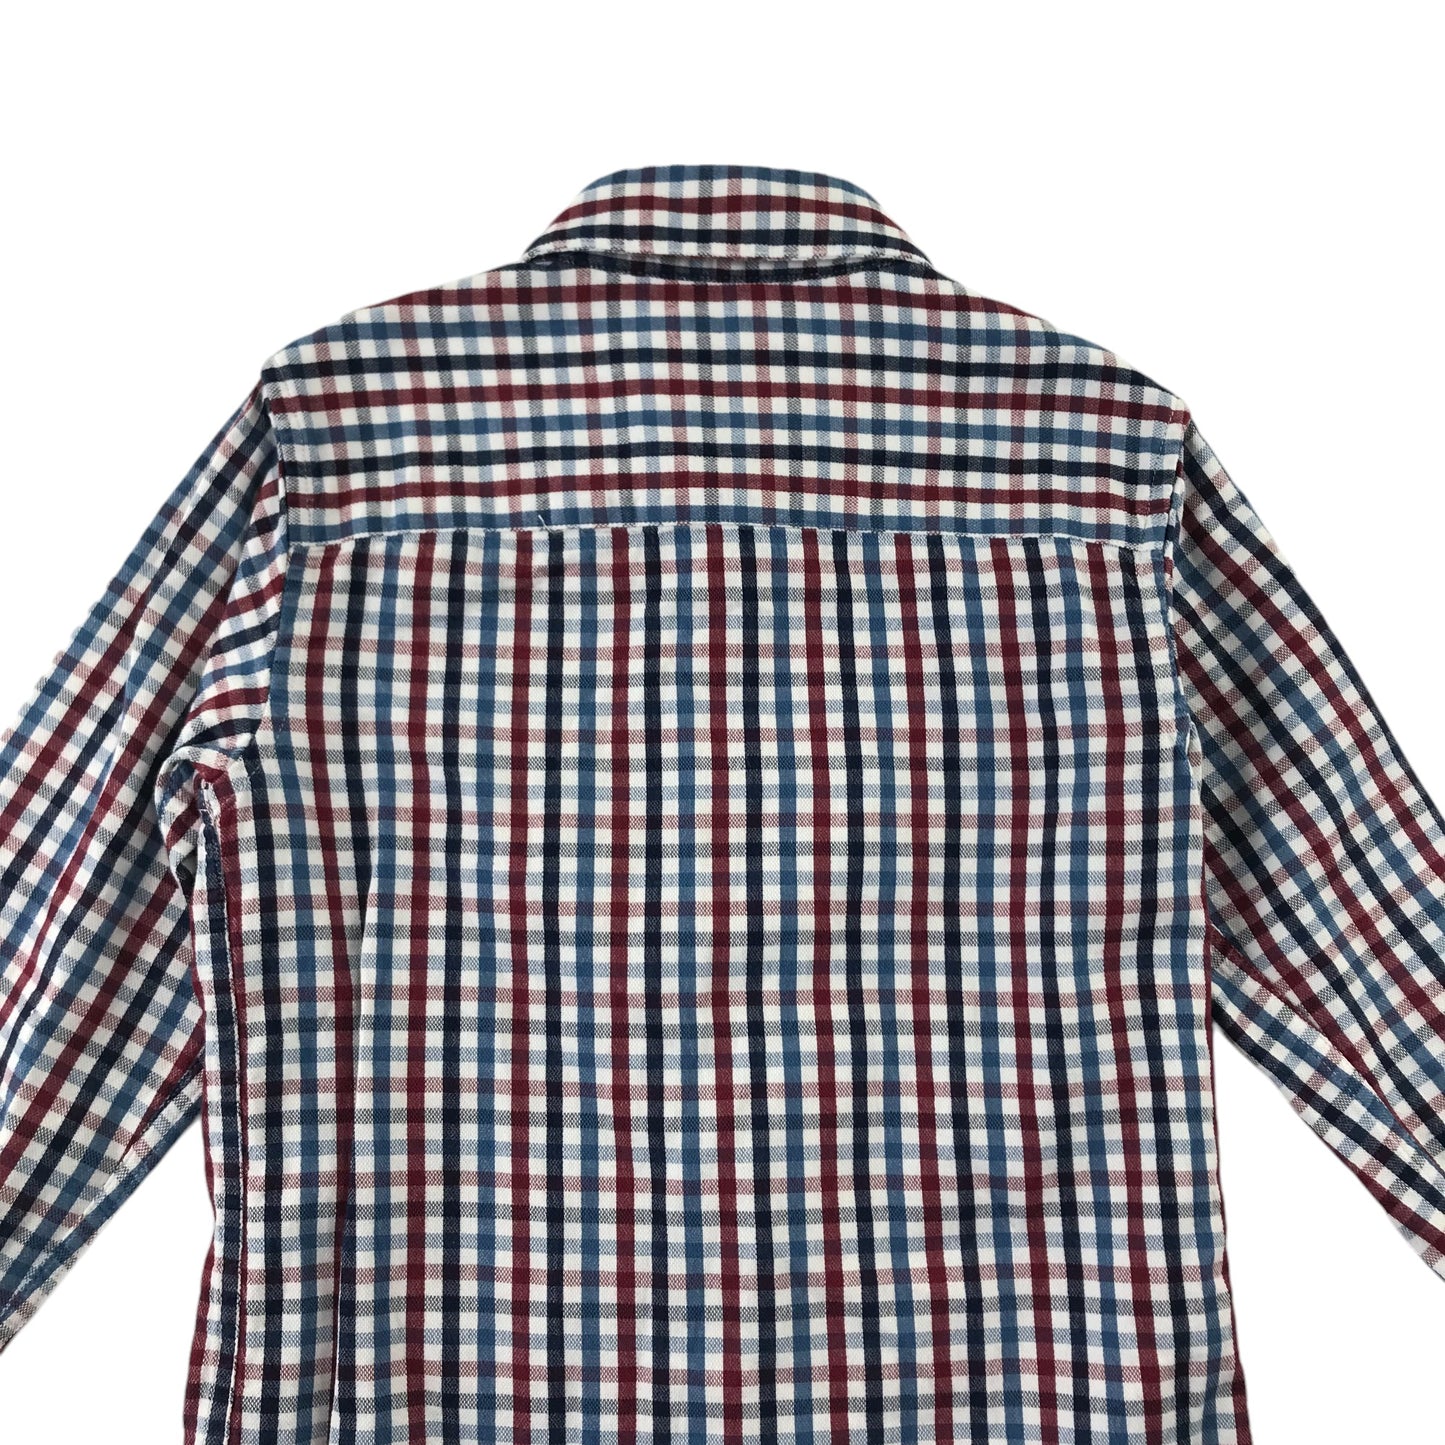 Jasper Conran shirt 7 years red and navy checked cotton